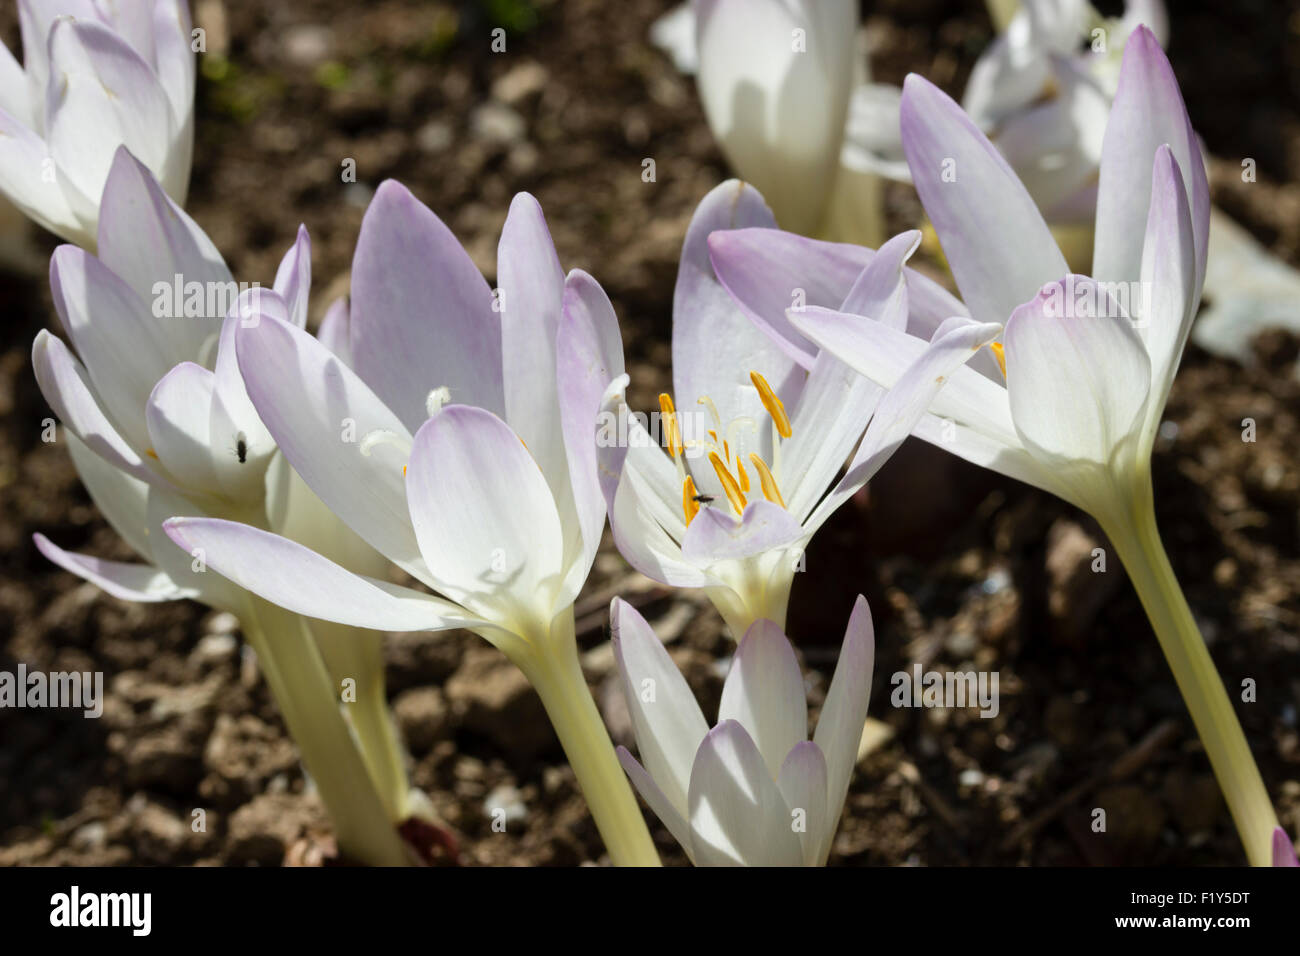 Blush pink form of the autumn blooming meadow saffron, Colchicum autumnale Stock Photo